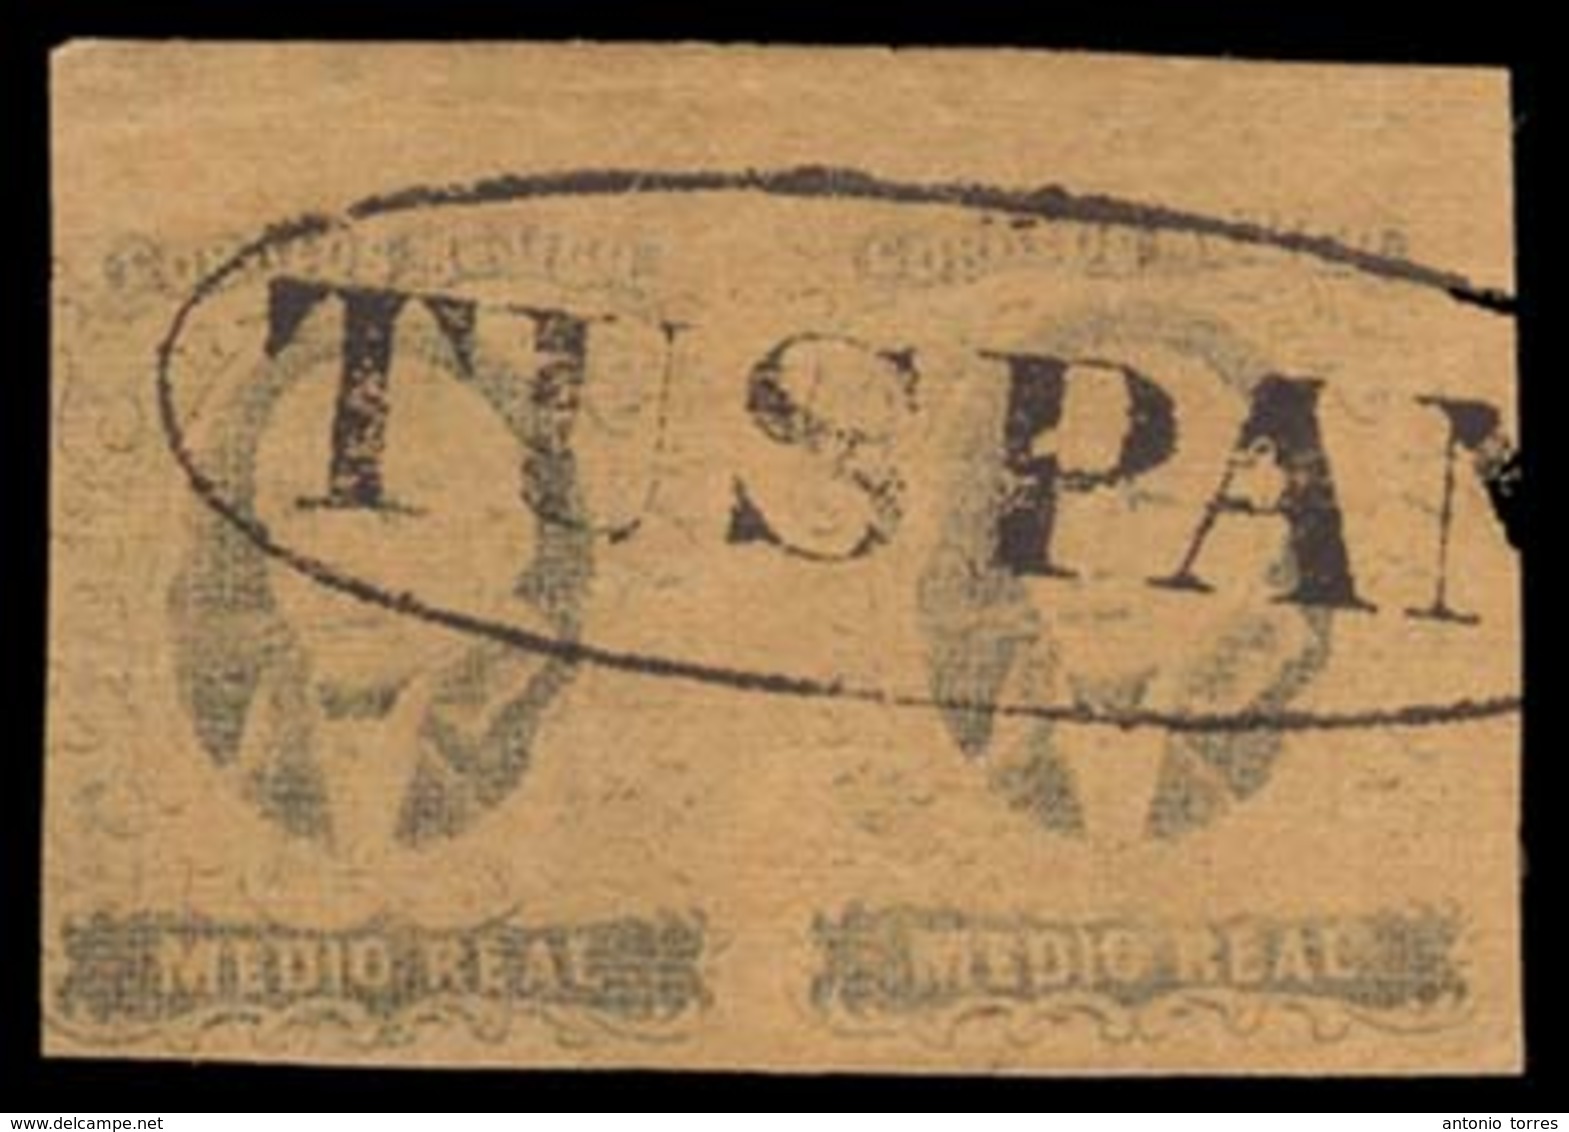 MEXICO. Sc. 6a, Used (2). 1861 1/2 Real, No Name Ovpt (TUXPAN). Large Margins, Border At Top, Cancelled Oval TUSPAN (Sch - Mexico